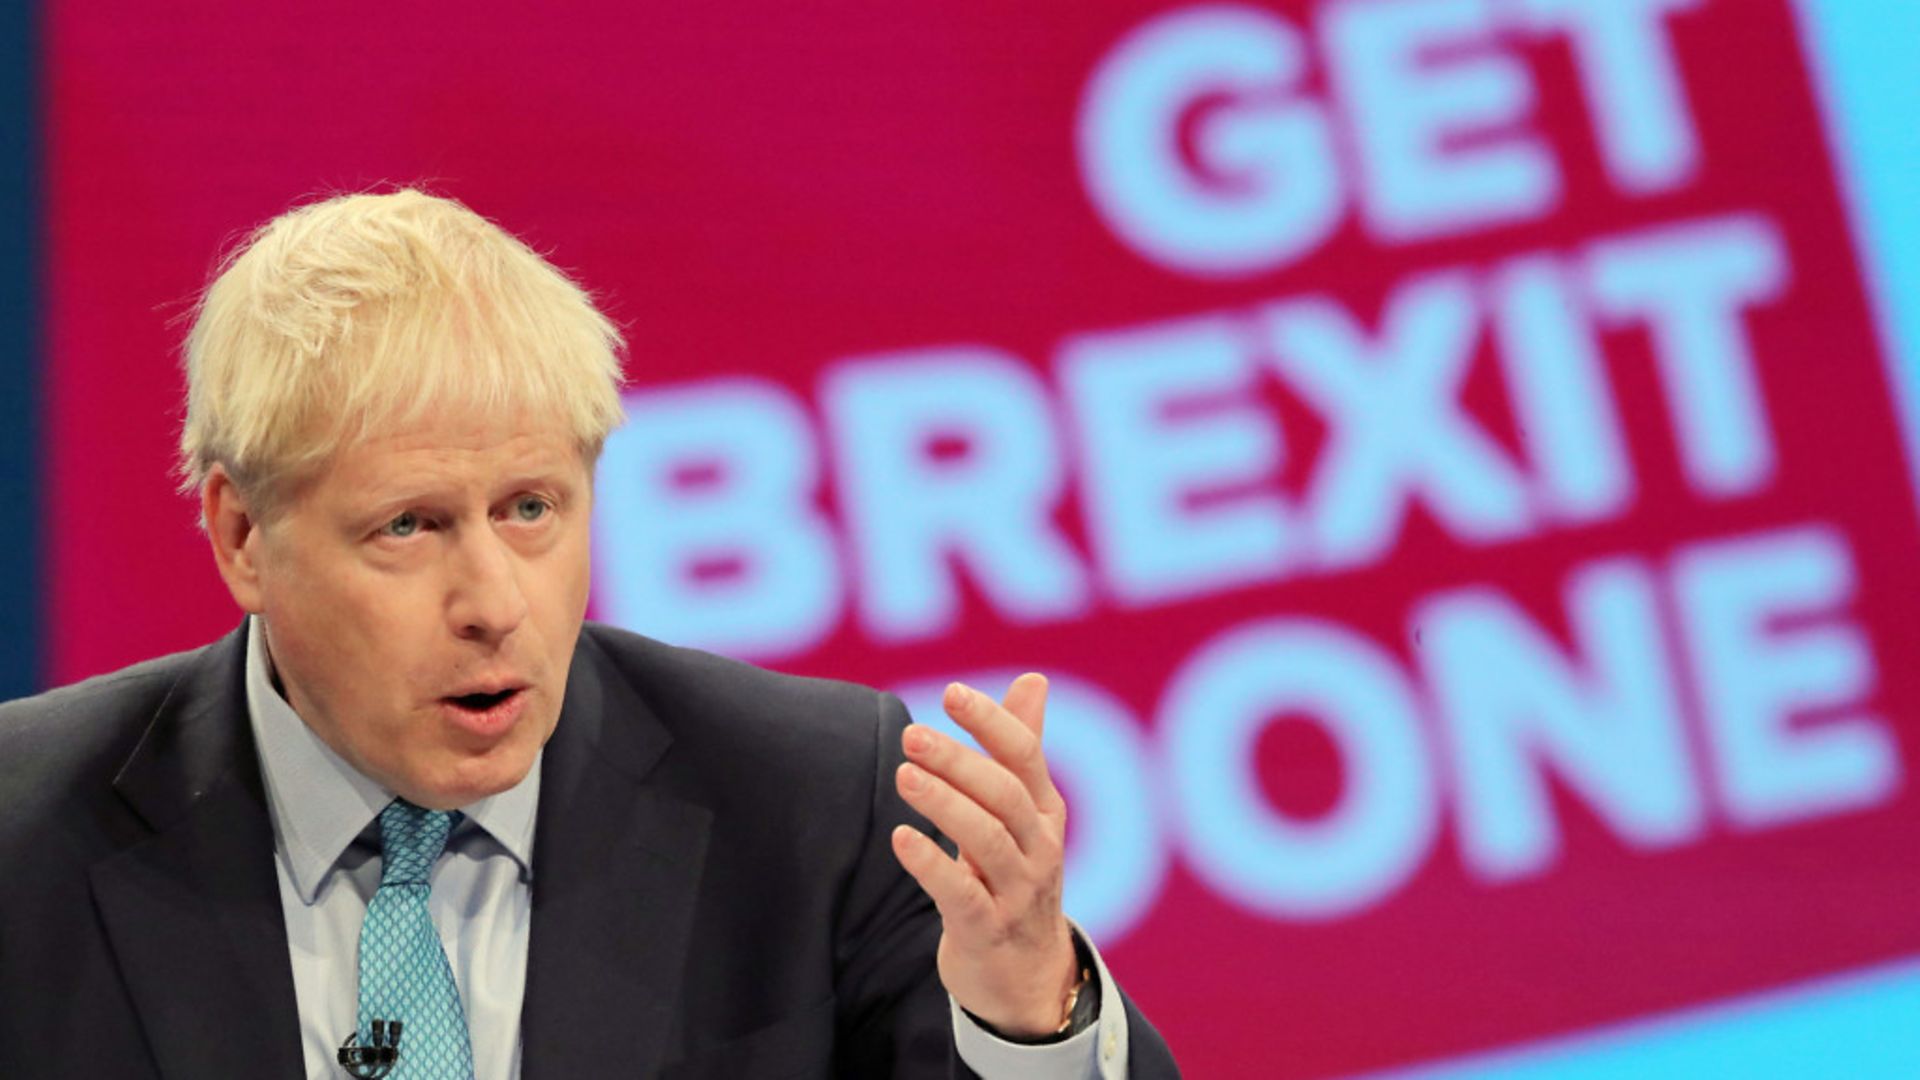 Boris Johnson in front of a 'get Brexit done' screen. - Credit: Danny Lawson/PA Wire